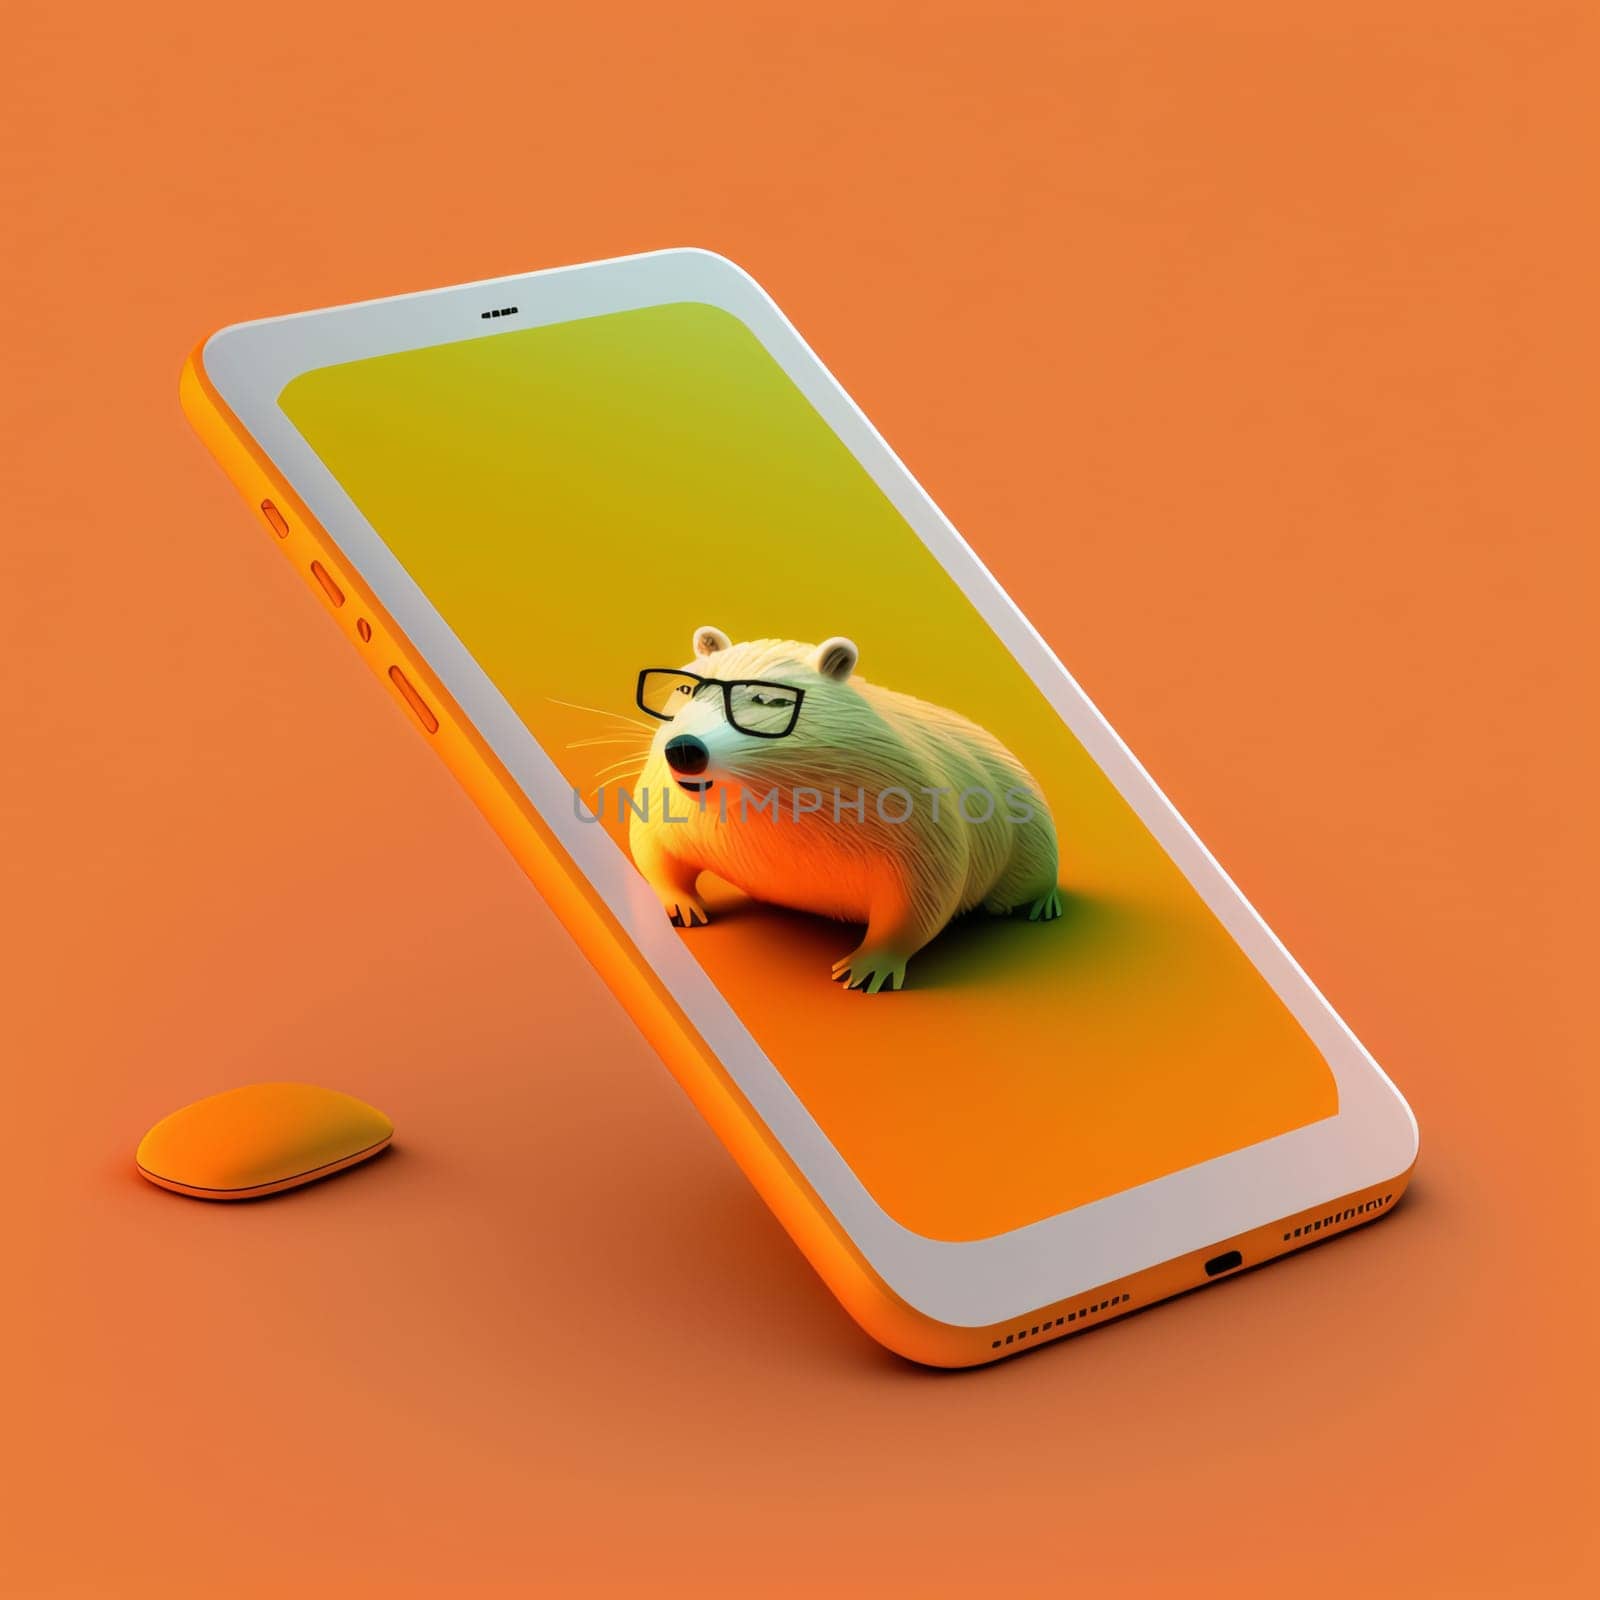 Smartphone screen: 3d rendering of a hamster next to a smartphone on orange background